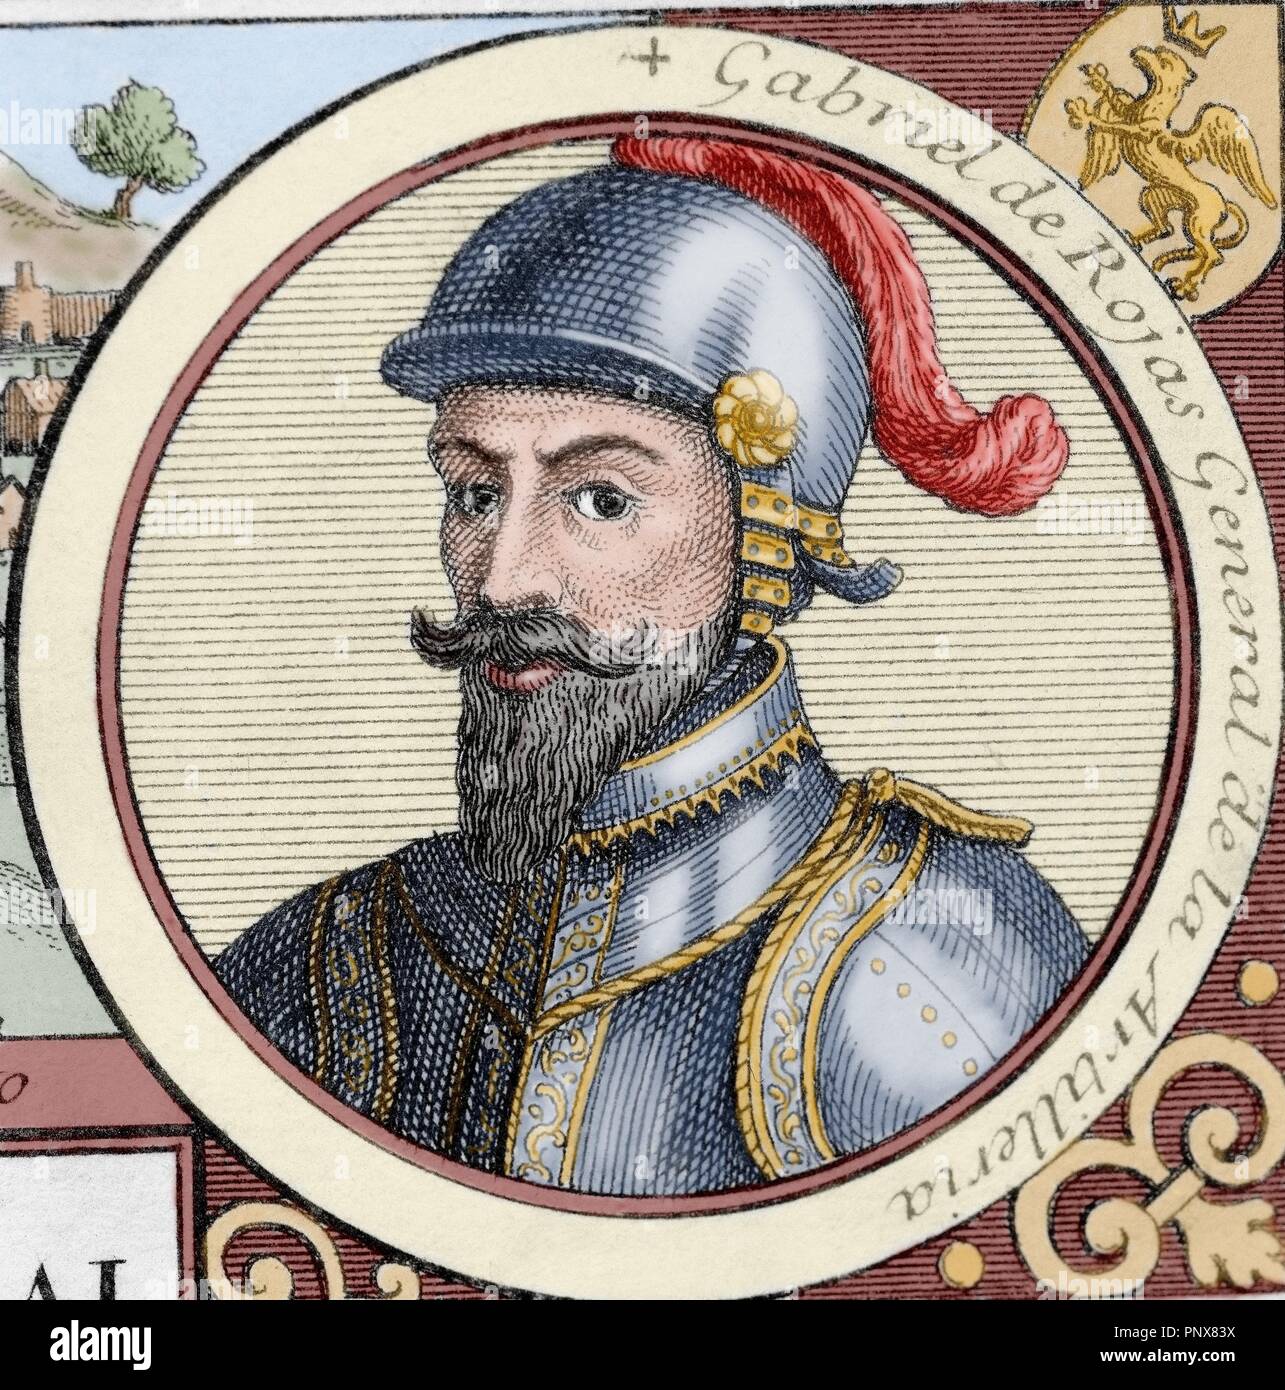 Gabriel de Rojas Cordova (c.1480-1549). Spanish conqueror. Engraving at The Truthful History of the Conquest of New Spain by Bernal Diaz del Castillo.  Colored. Library of the University of Barcelona. Spain. Stock Photo